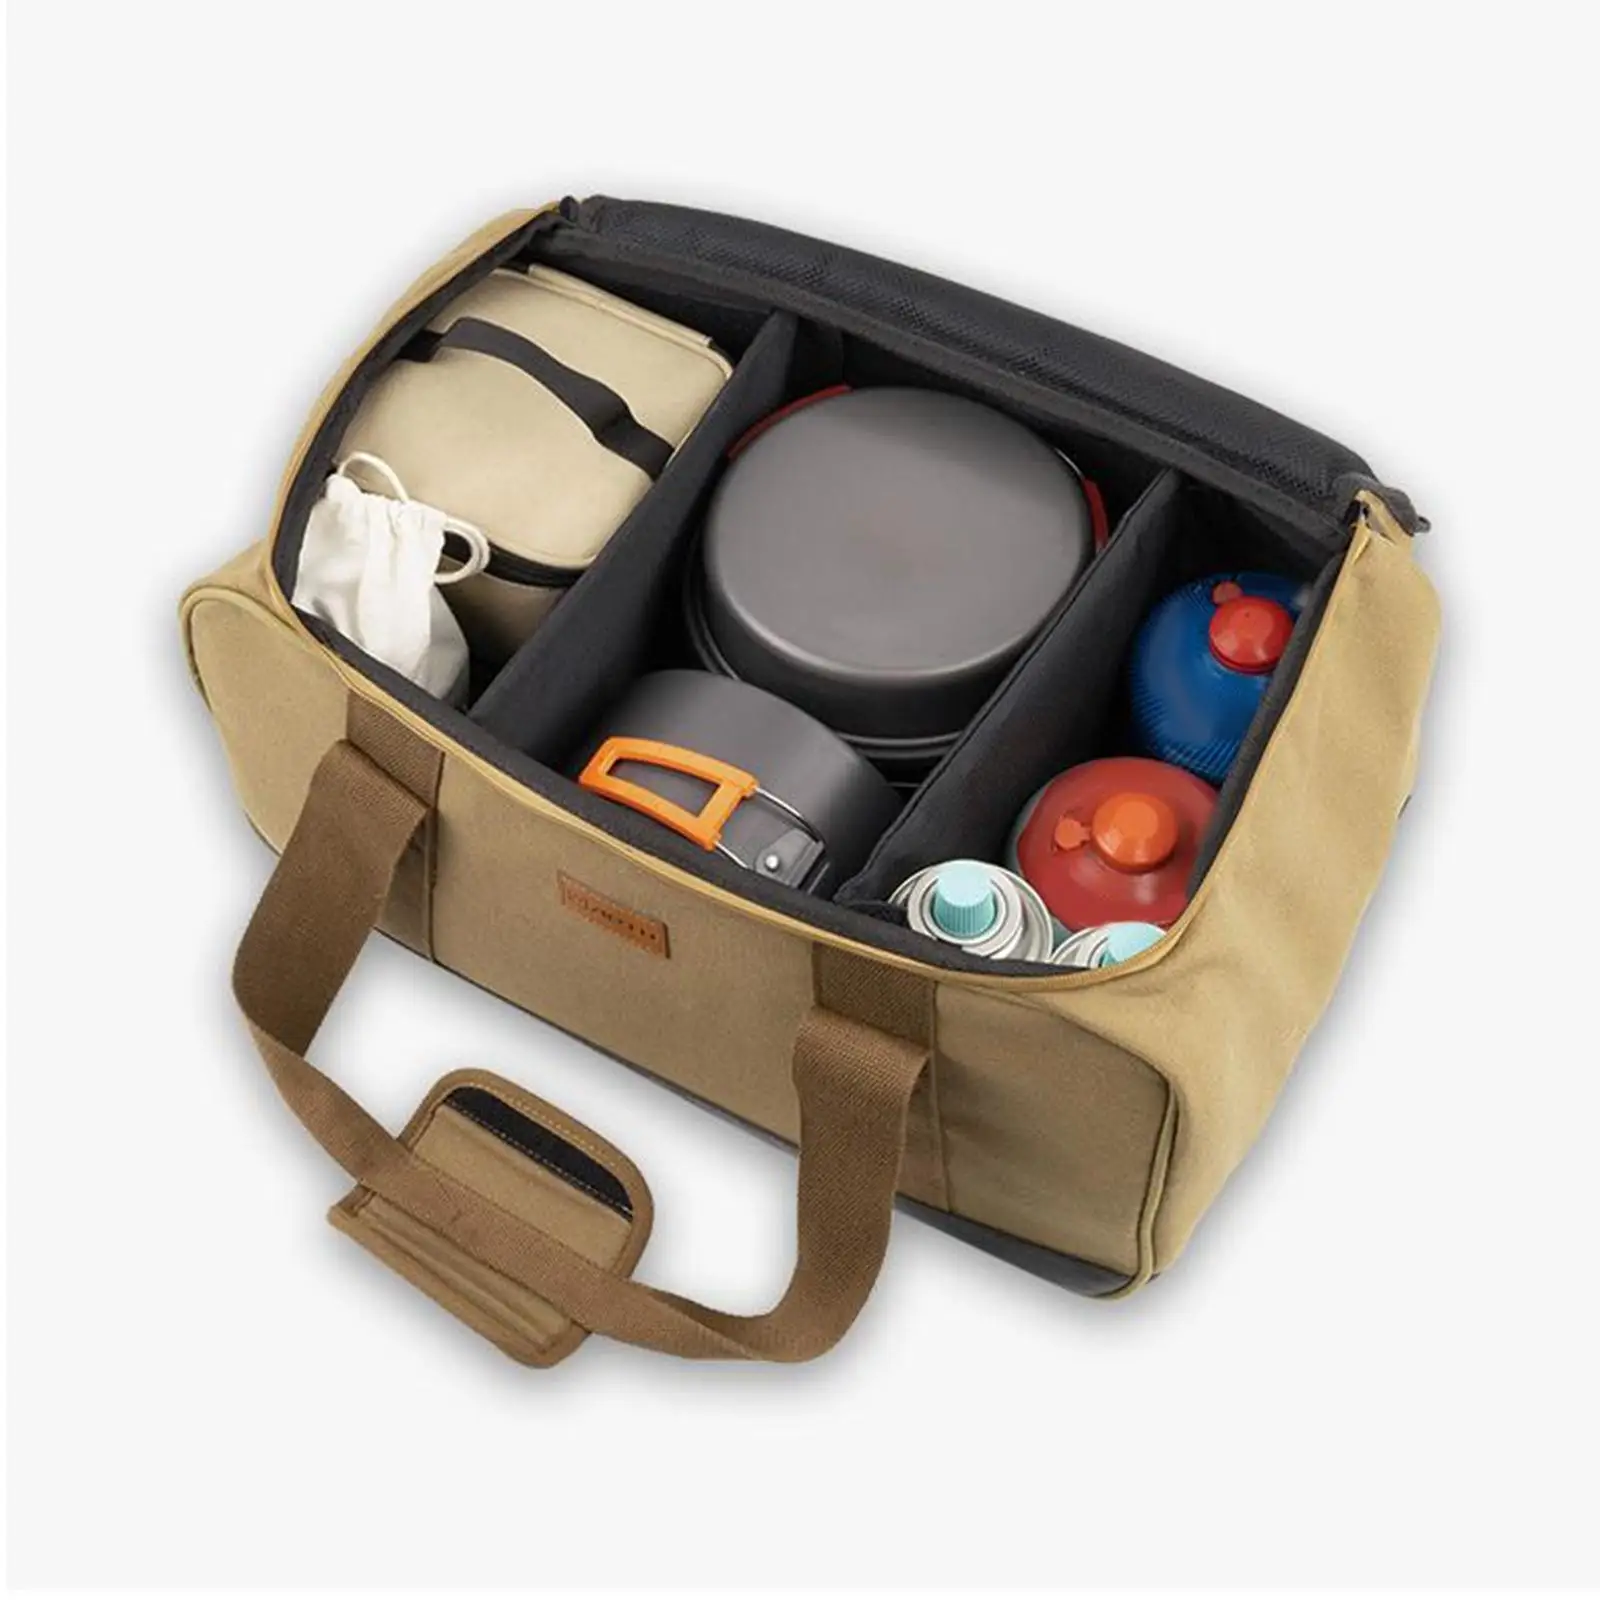  Accessories Bag Camping Accessories Tool Bag Pouch for Grill